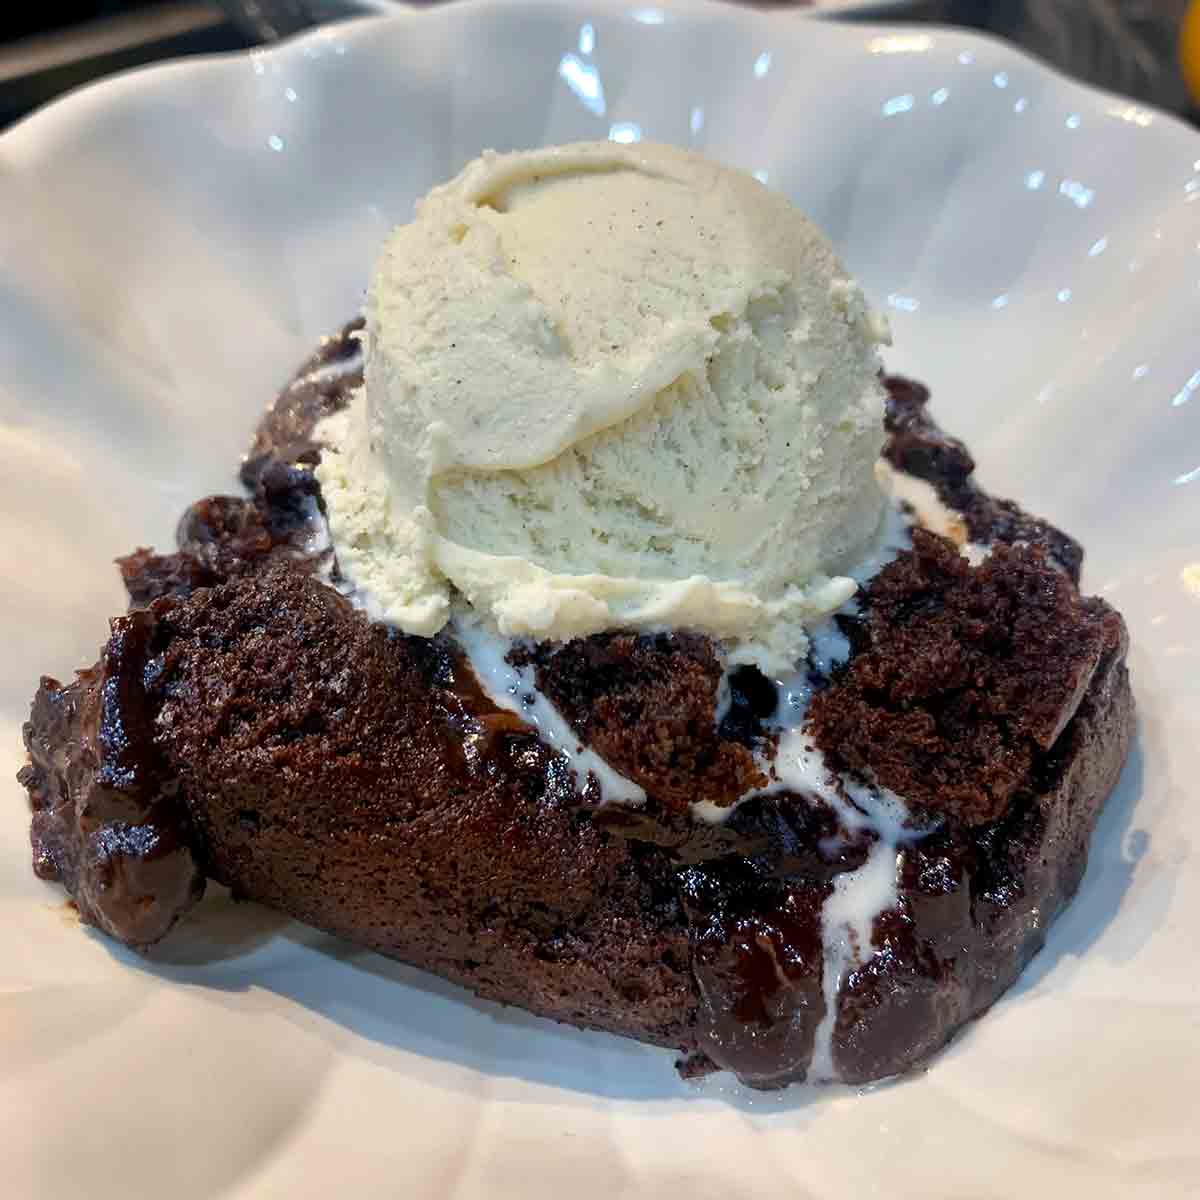 A serving of spicy hot fudge pudding cake in a white bowl topped with a scoop of ice cream.